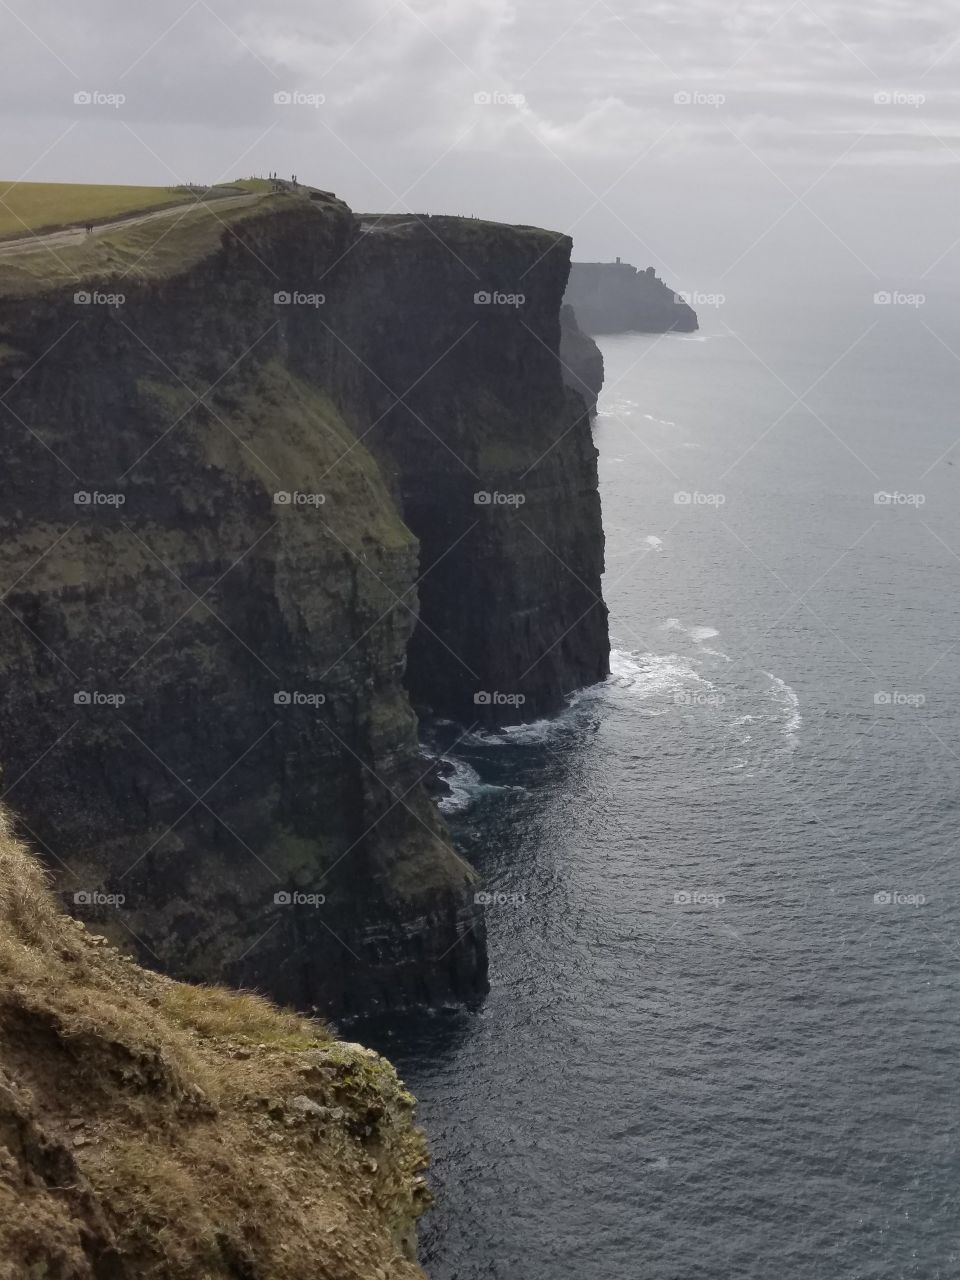 Sightseeing in Ireland the Cliffs of Moher